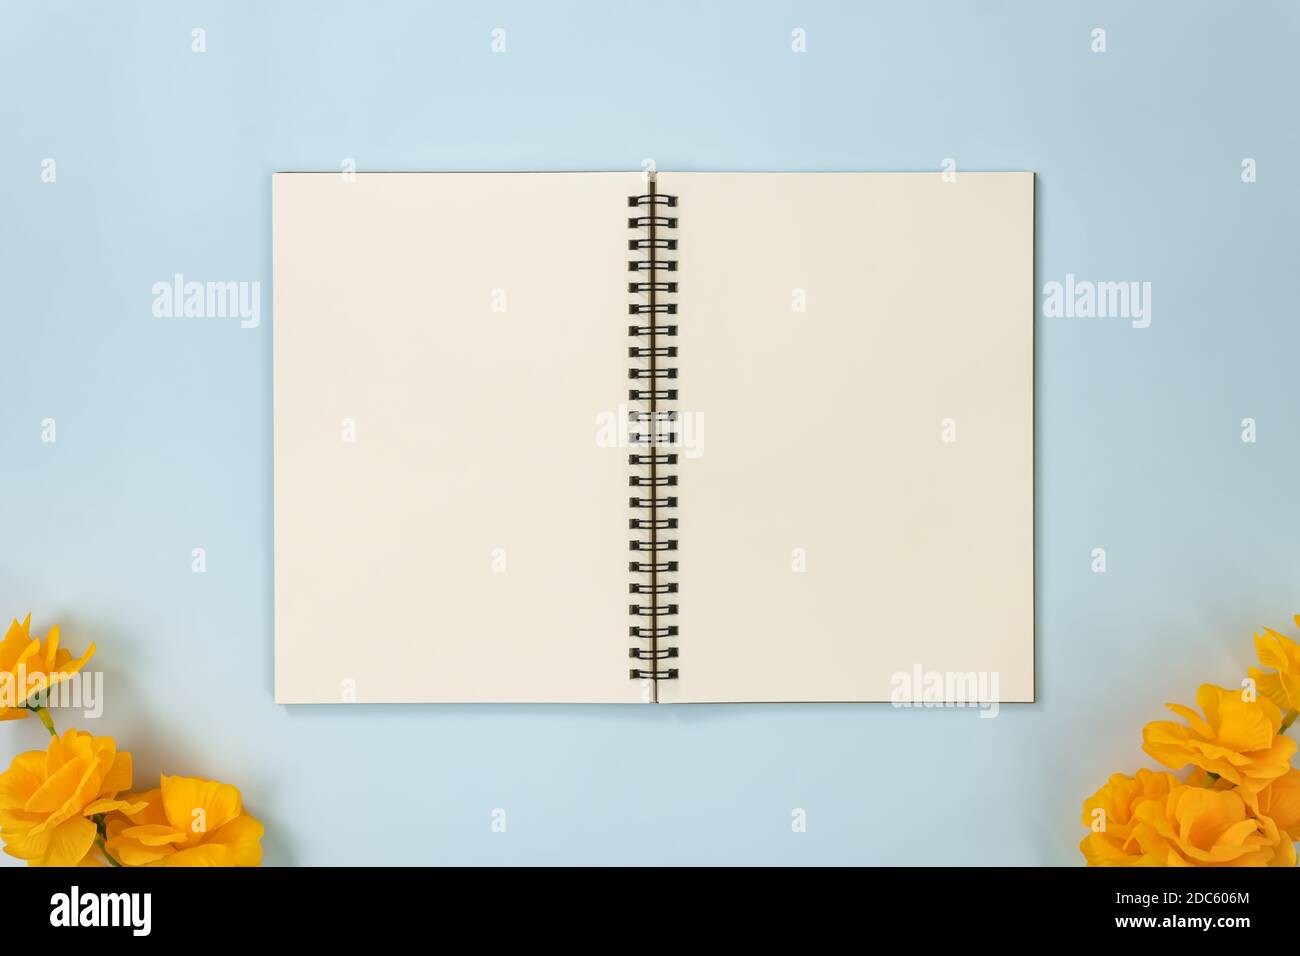 Top Table Spiral Notebook or Spring Notebook Mockup in Unlined Type on Center Frame and Yellow Flowers at Bottom on Blue Pastel Minimalist Background Stock Photo